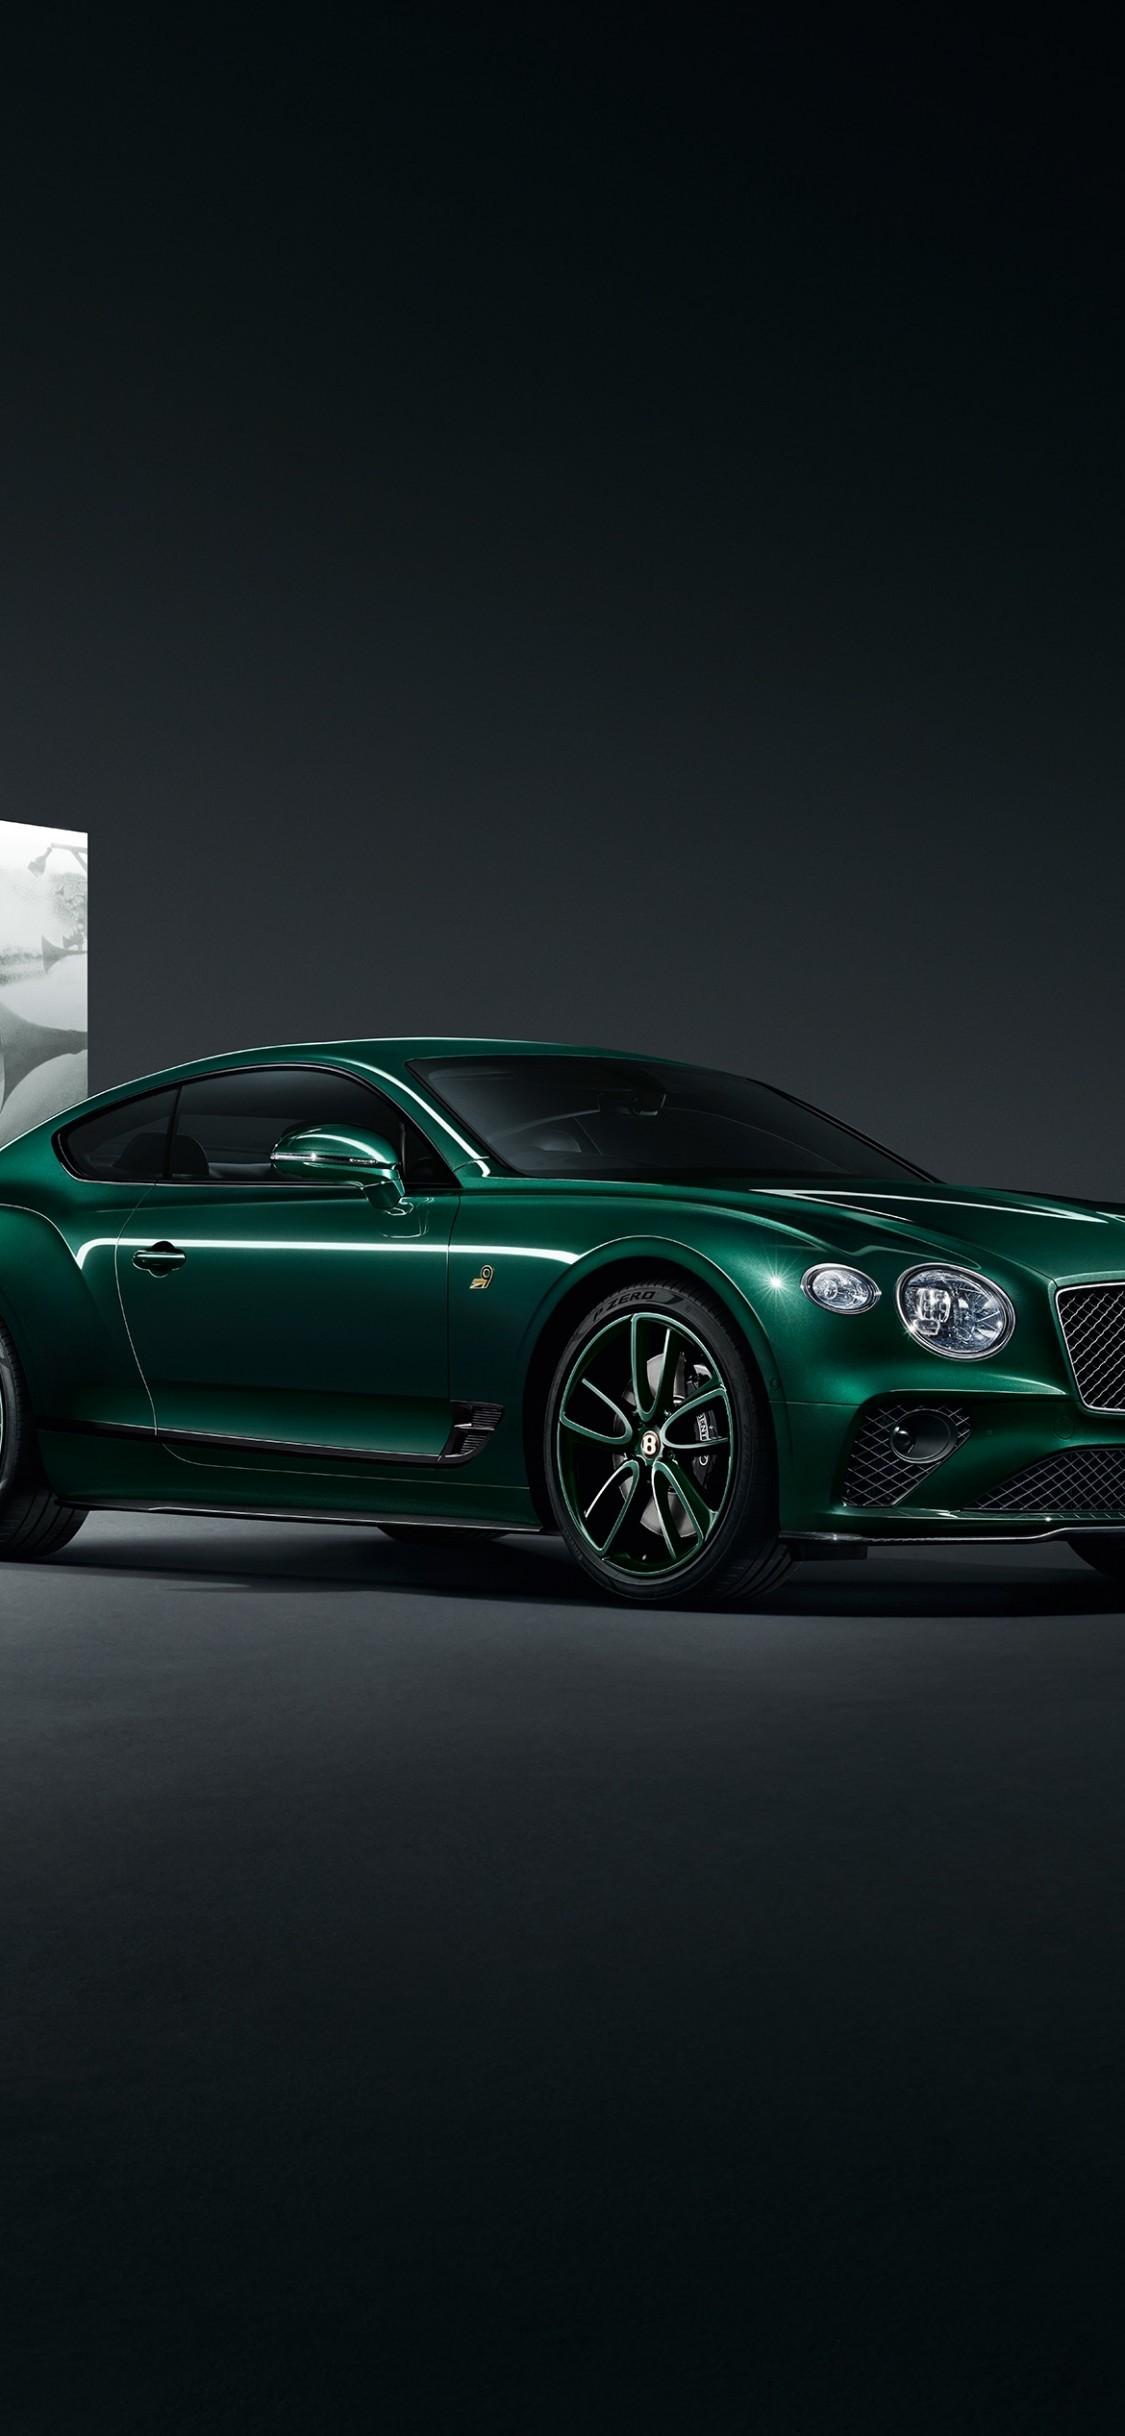 Download 1125x2436 Bentley Continental Gt Number 9 Edition